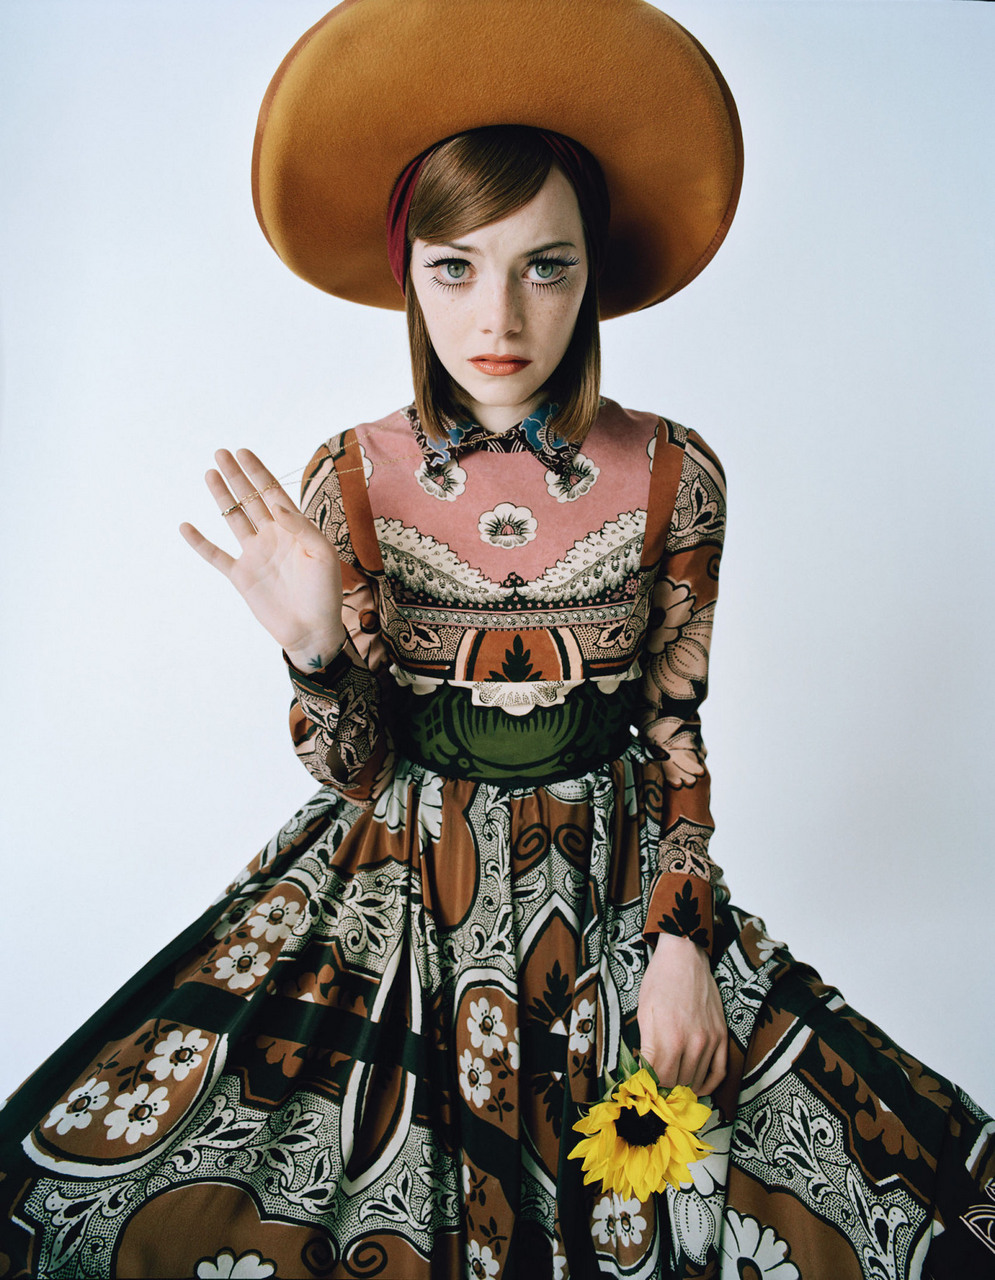 Hello 2015 Photograph By Tim Walker Styled By